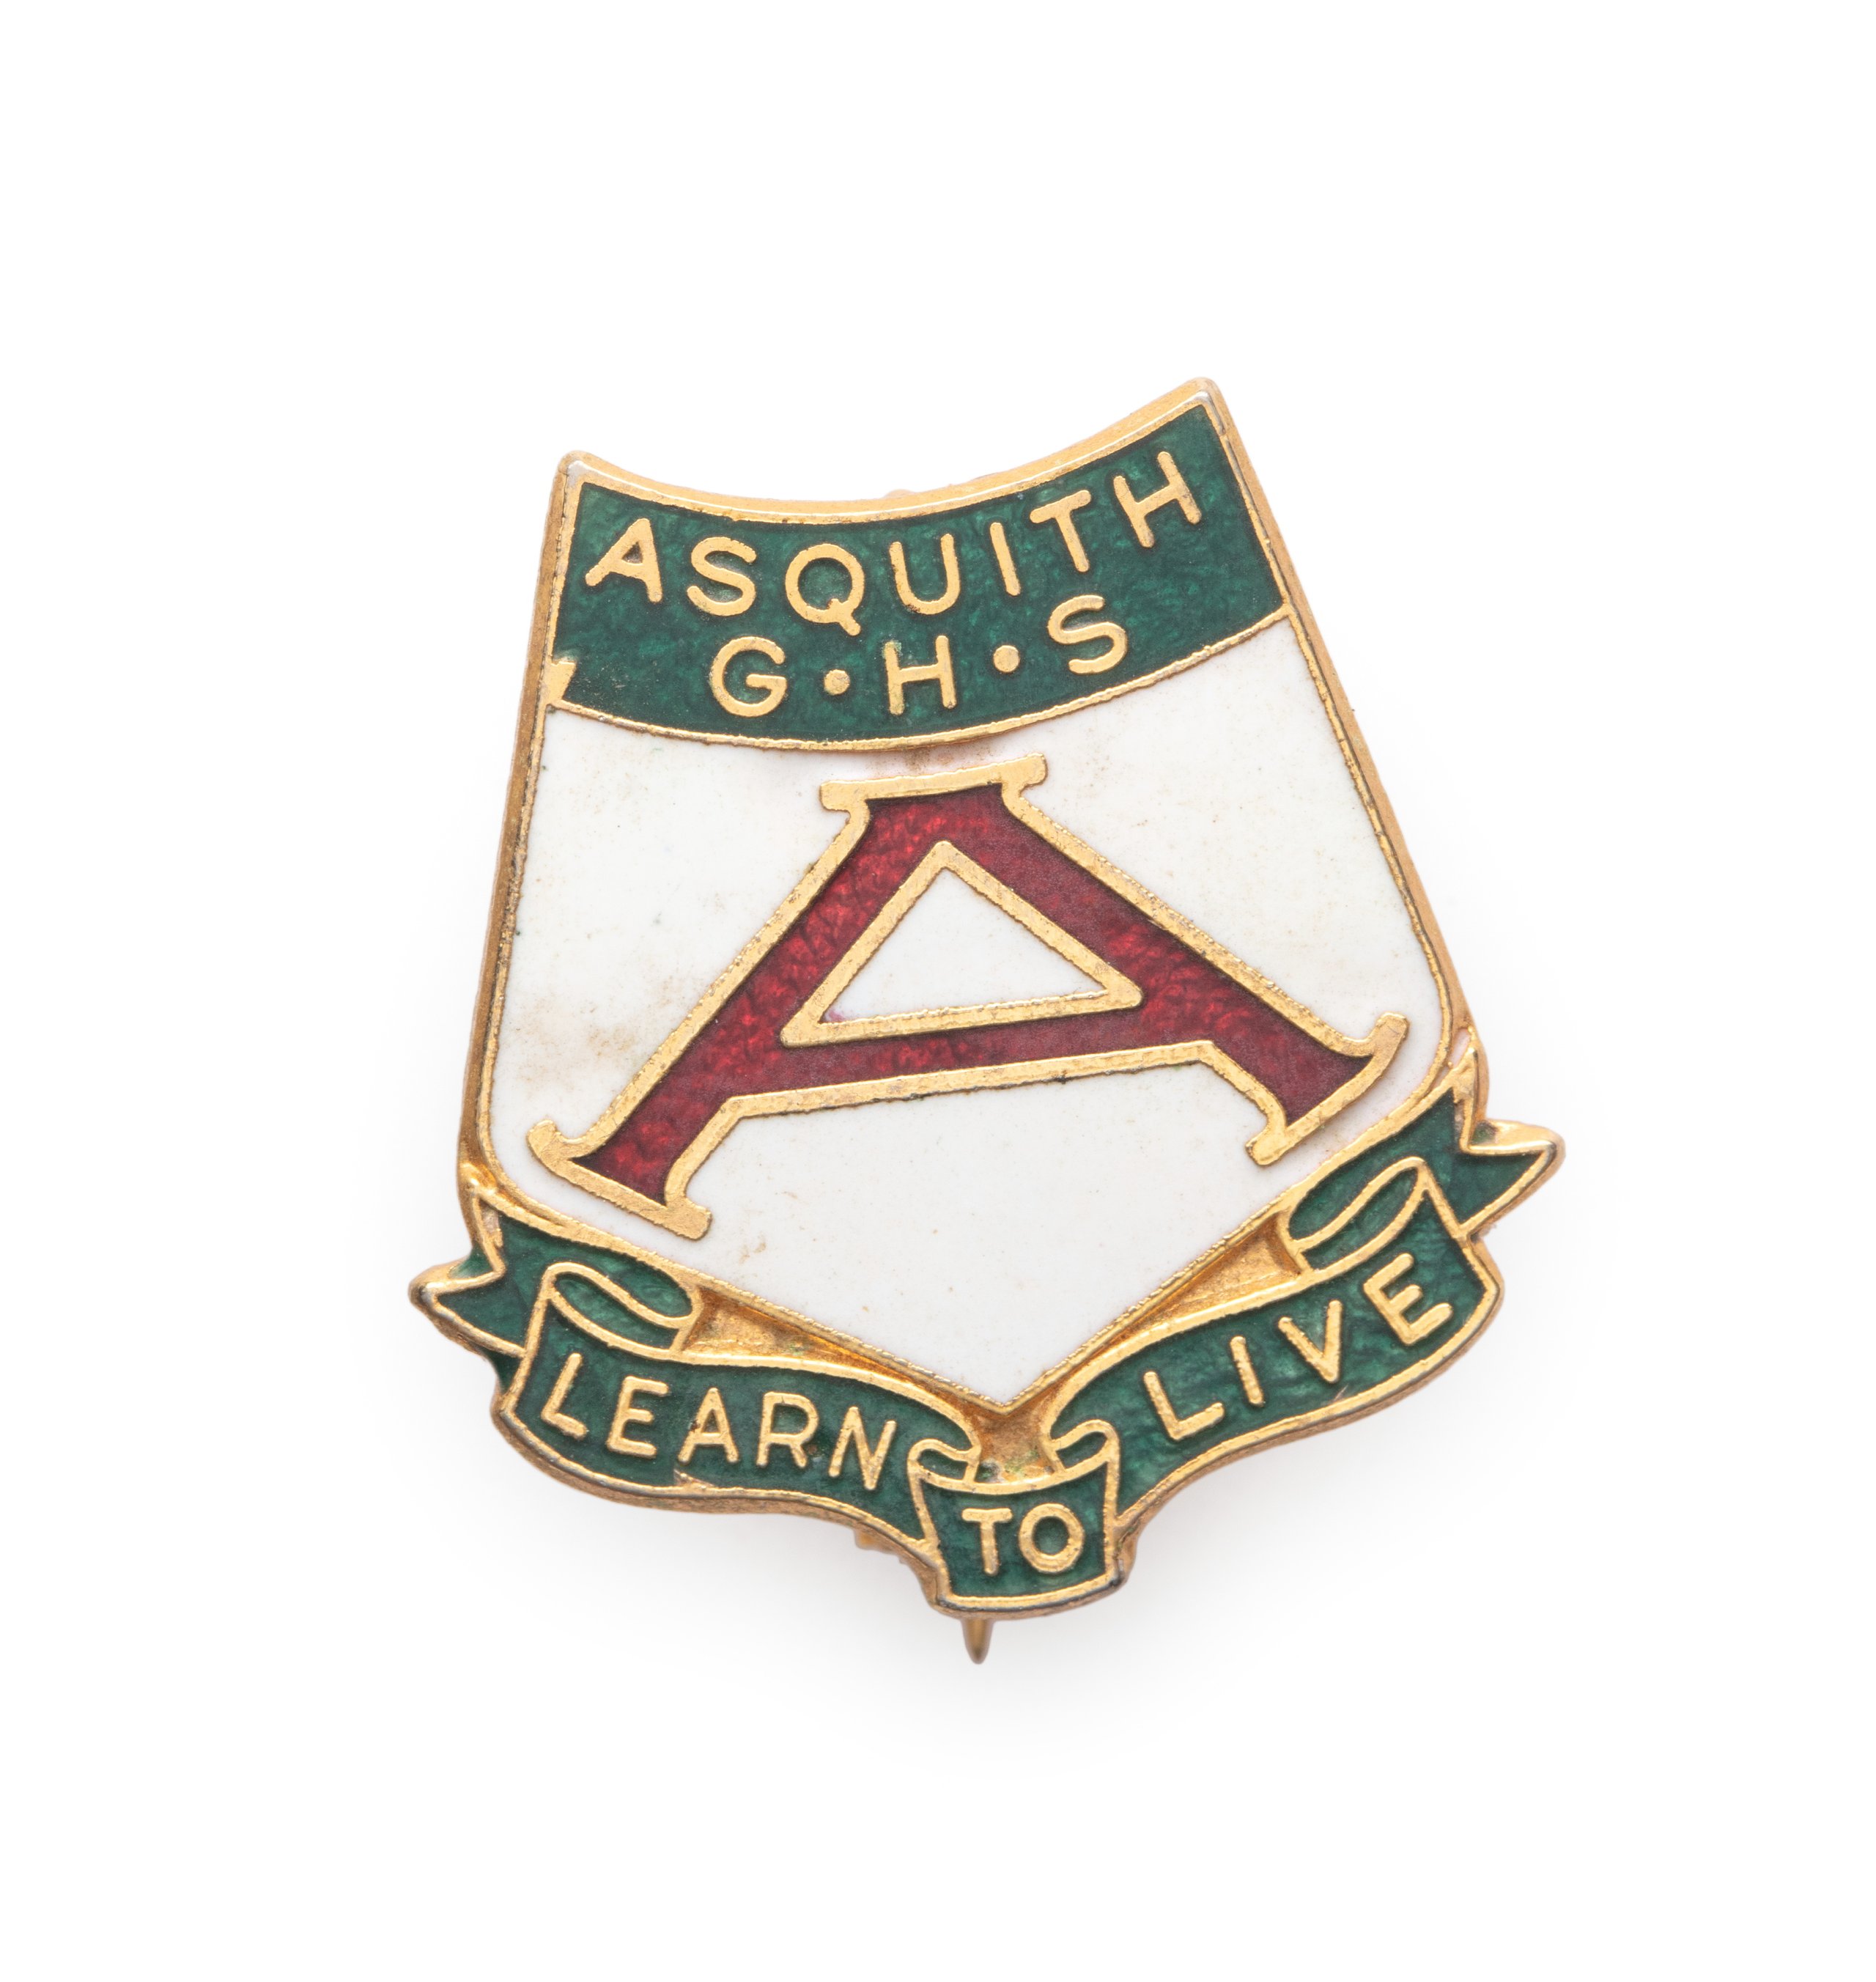 'Learn to Live' school badge